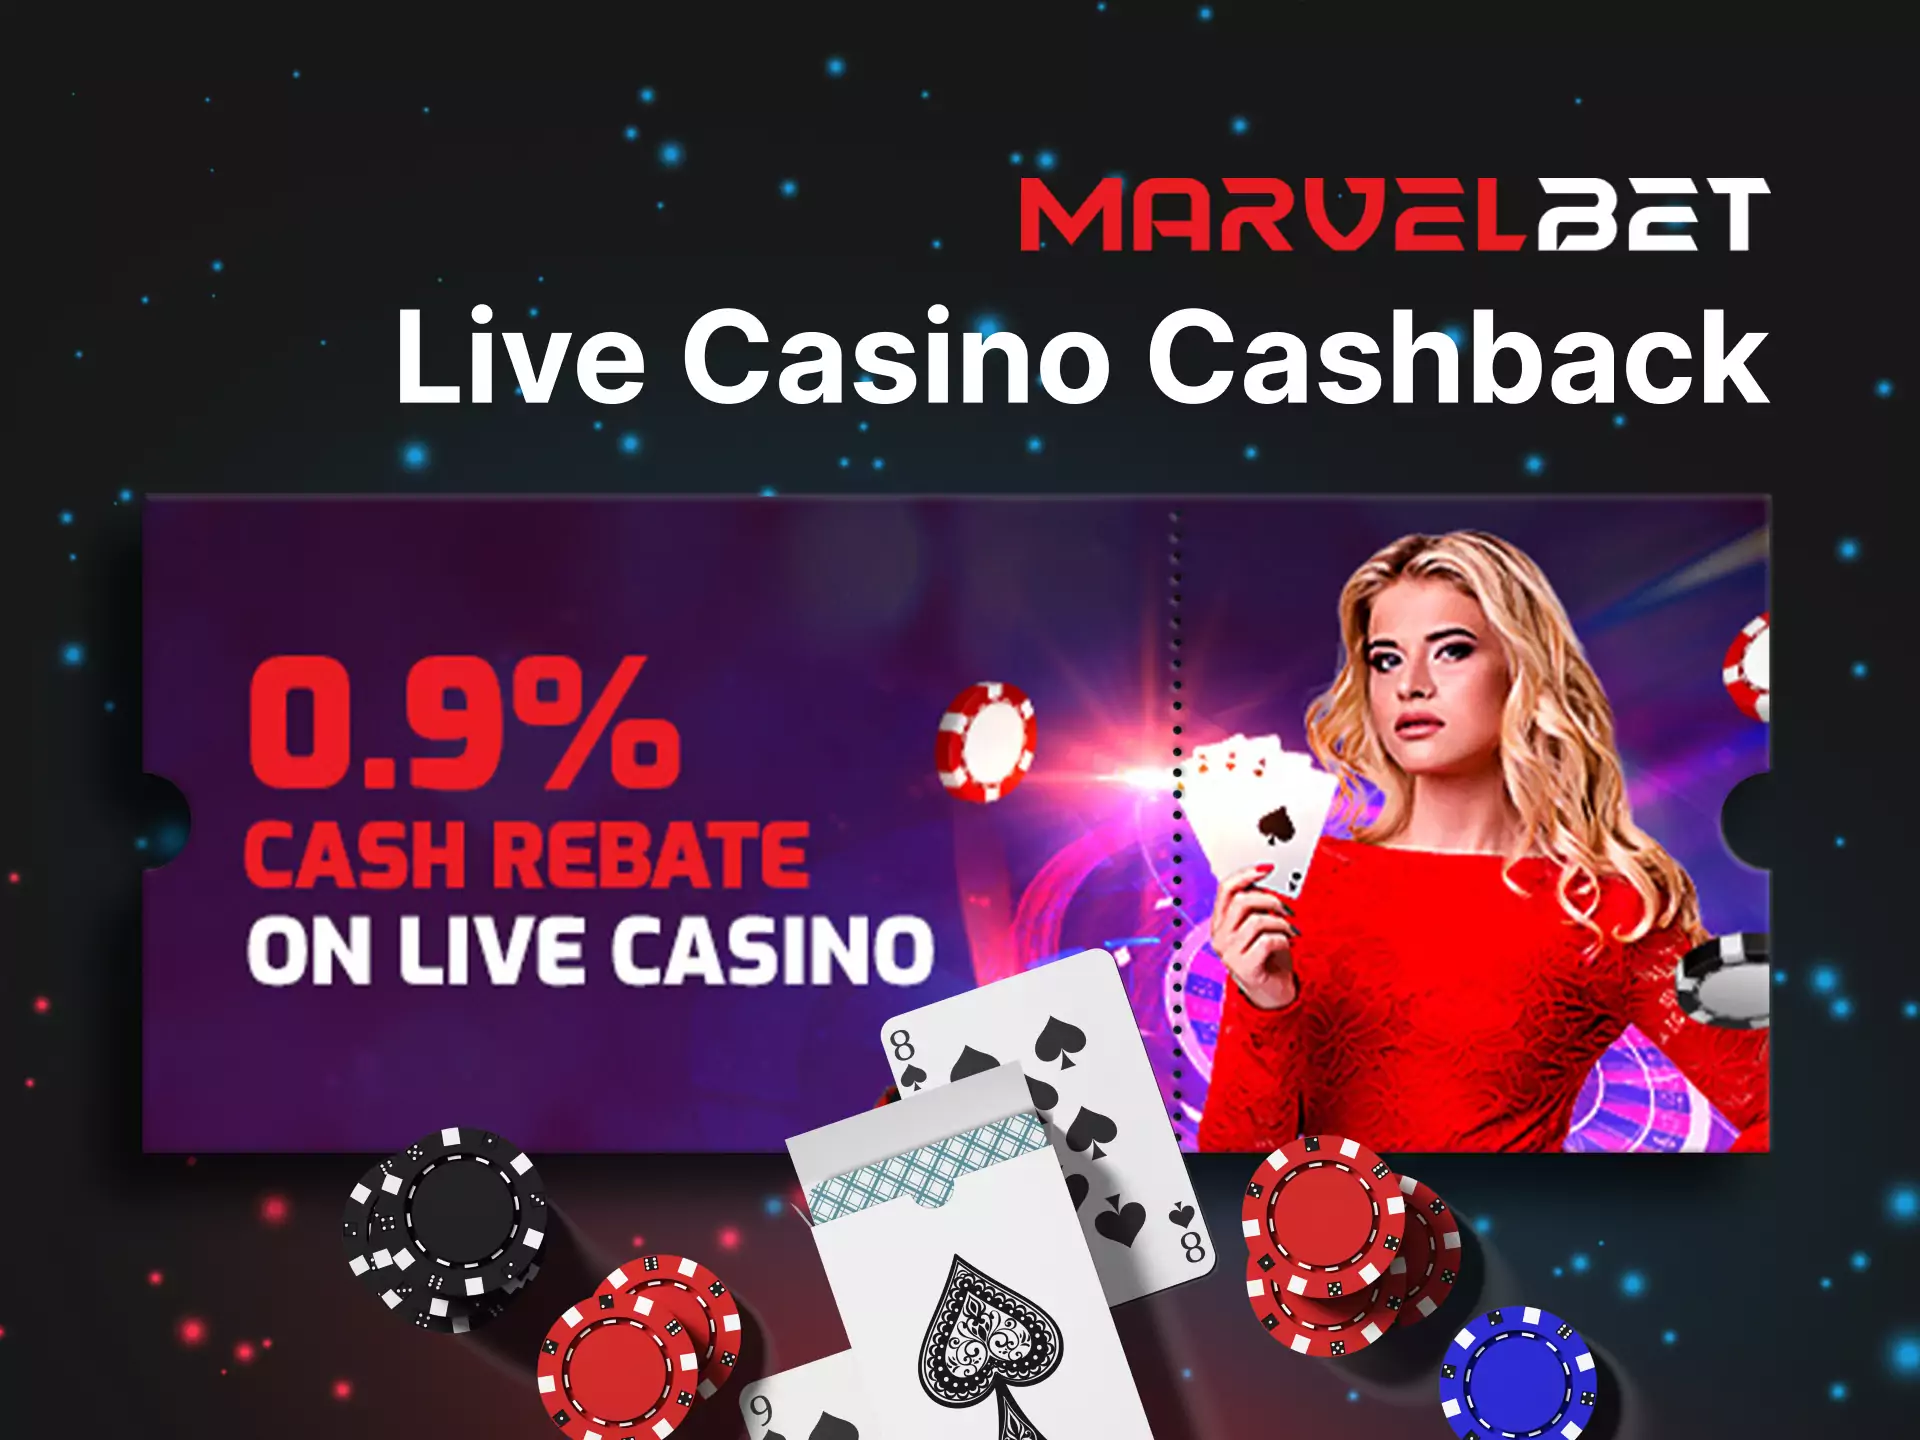 You can also get a cashback playing live casino games.